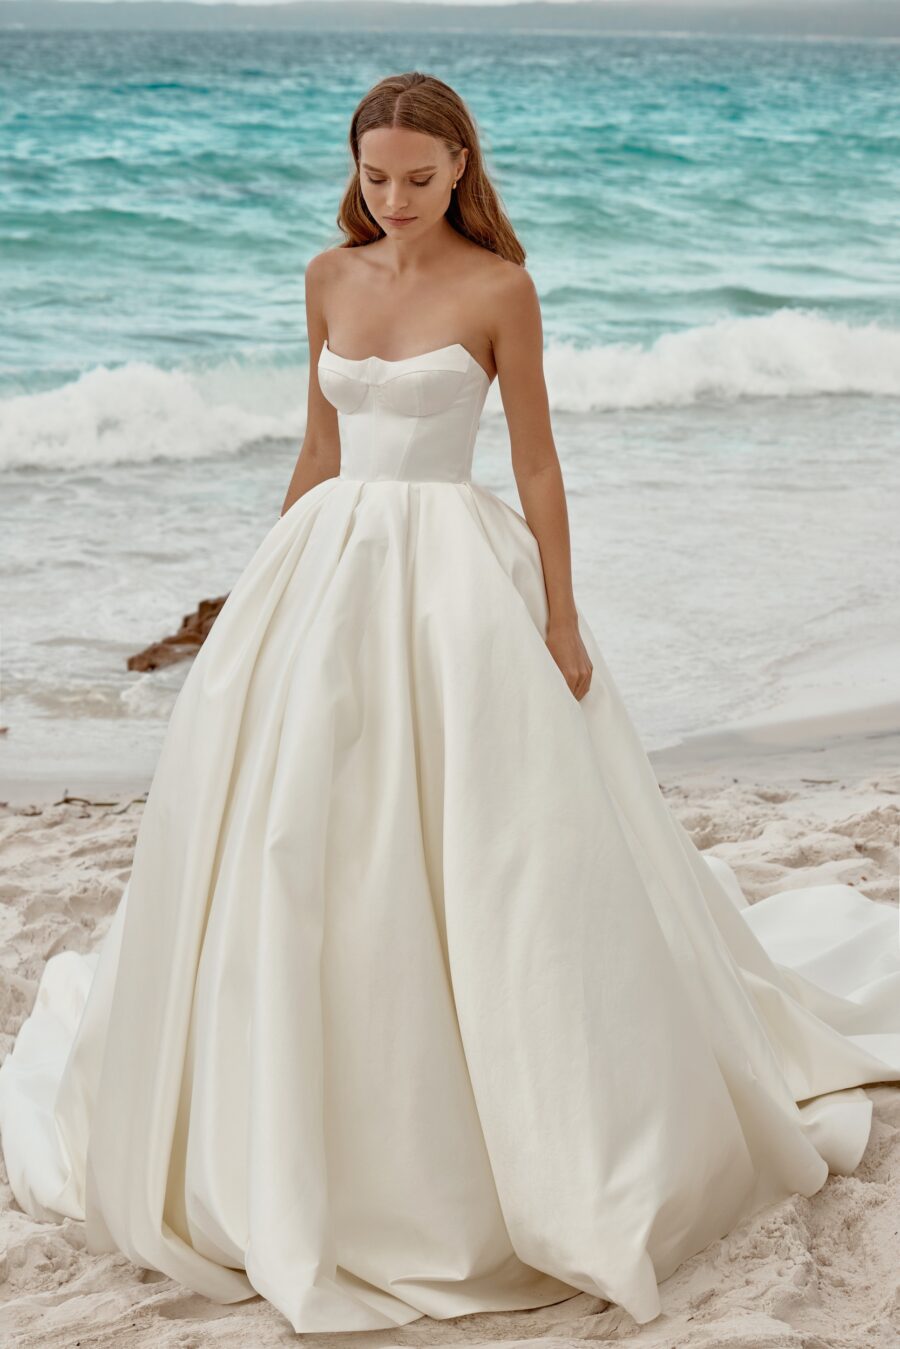 Yvonne 2 wedding dress by woná concept from atelier signature collection